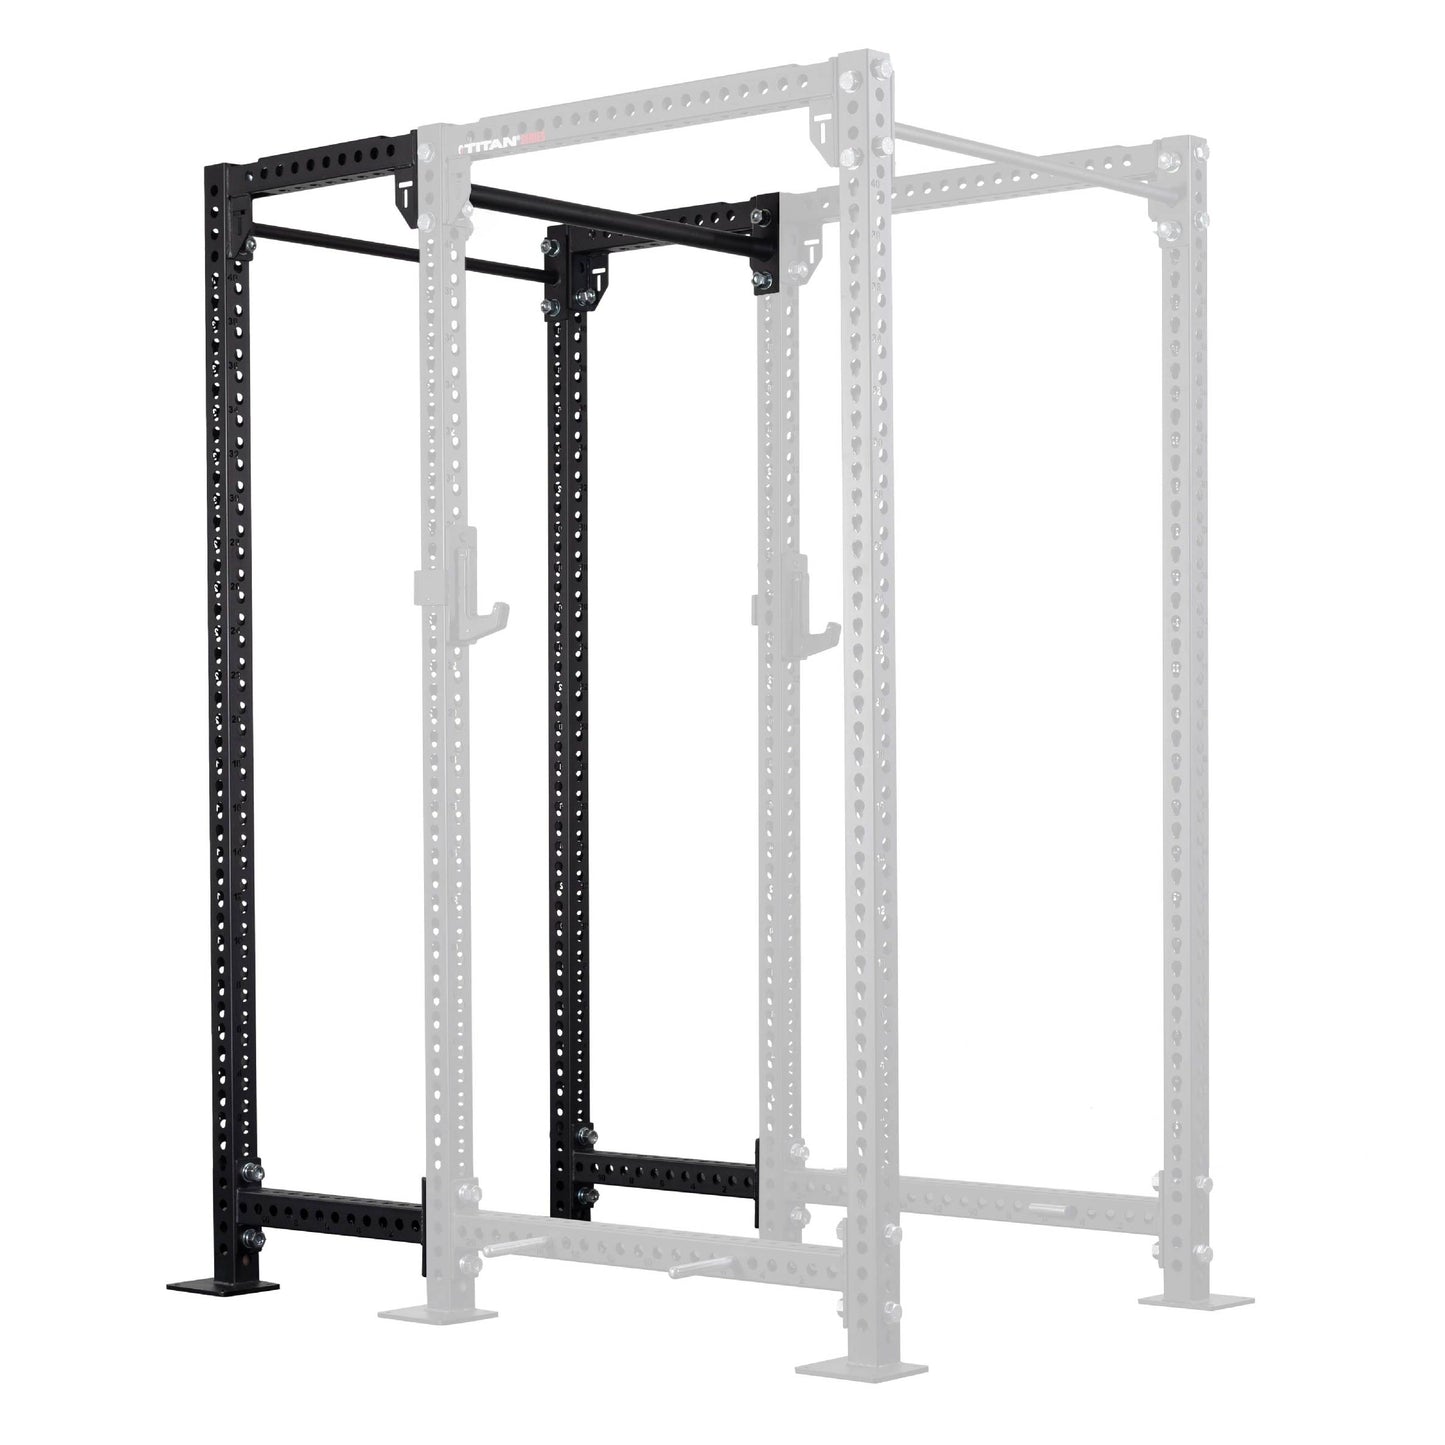 TITAN Series 24" Extension Kit - Extension Color: Black - Extension Height: 100" - Crossmember: 1.25" Pull-Up Bar | Black / 100" / 1.25" Pull-Up Bar - view 24